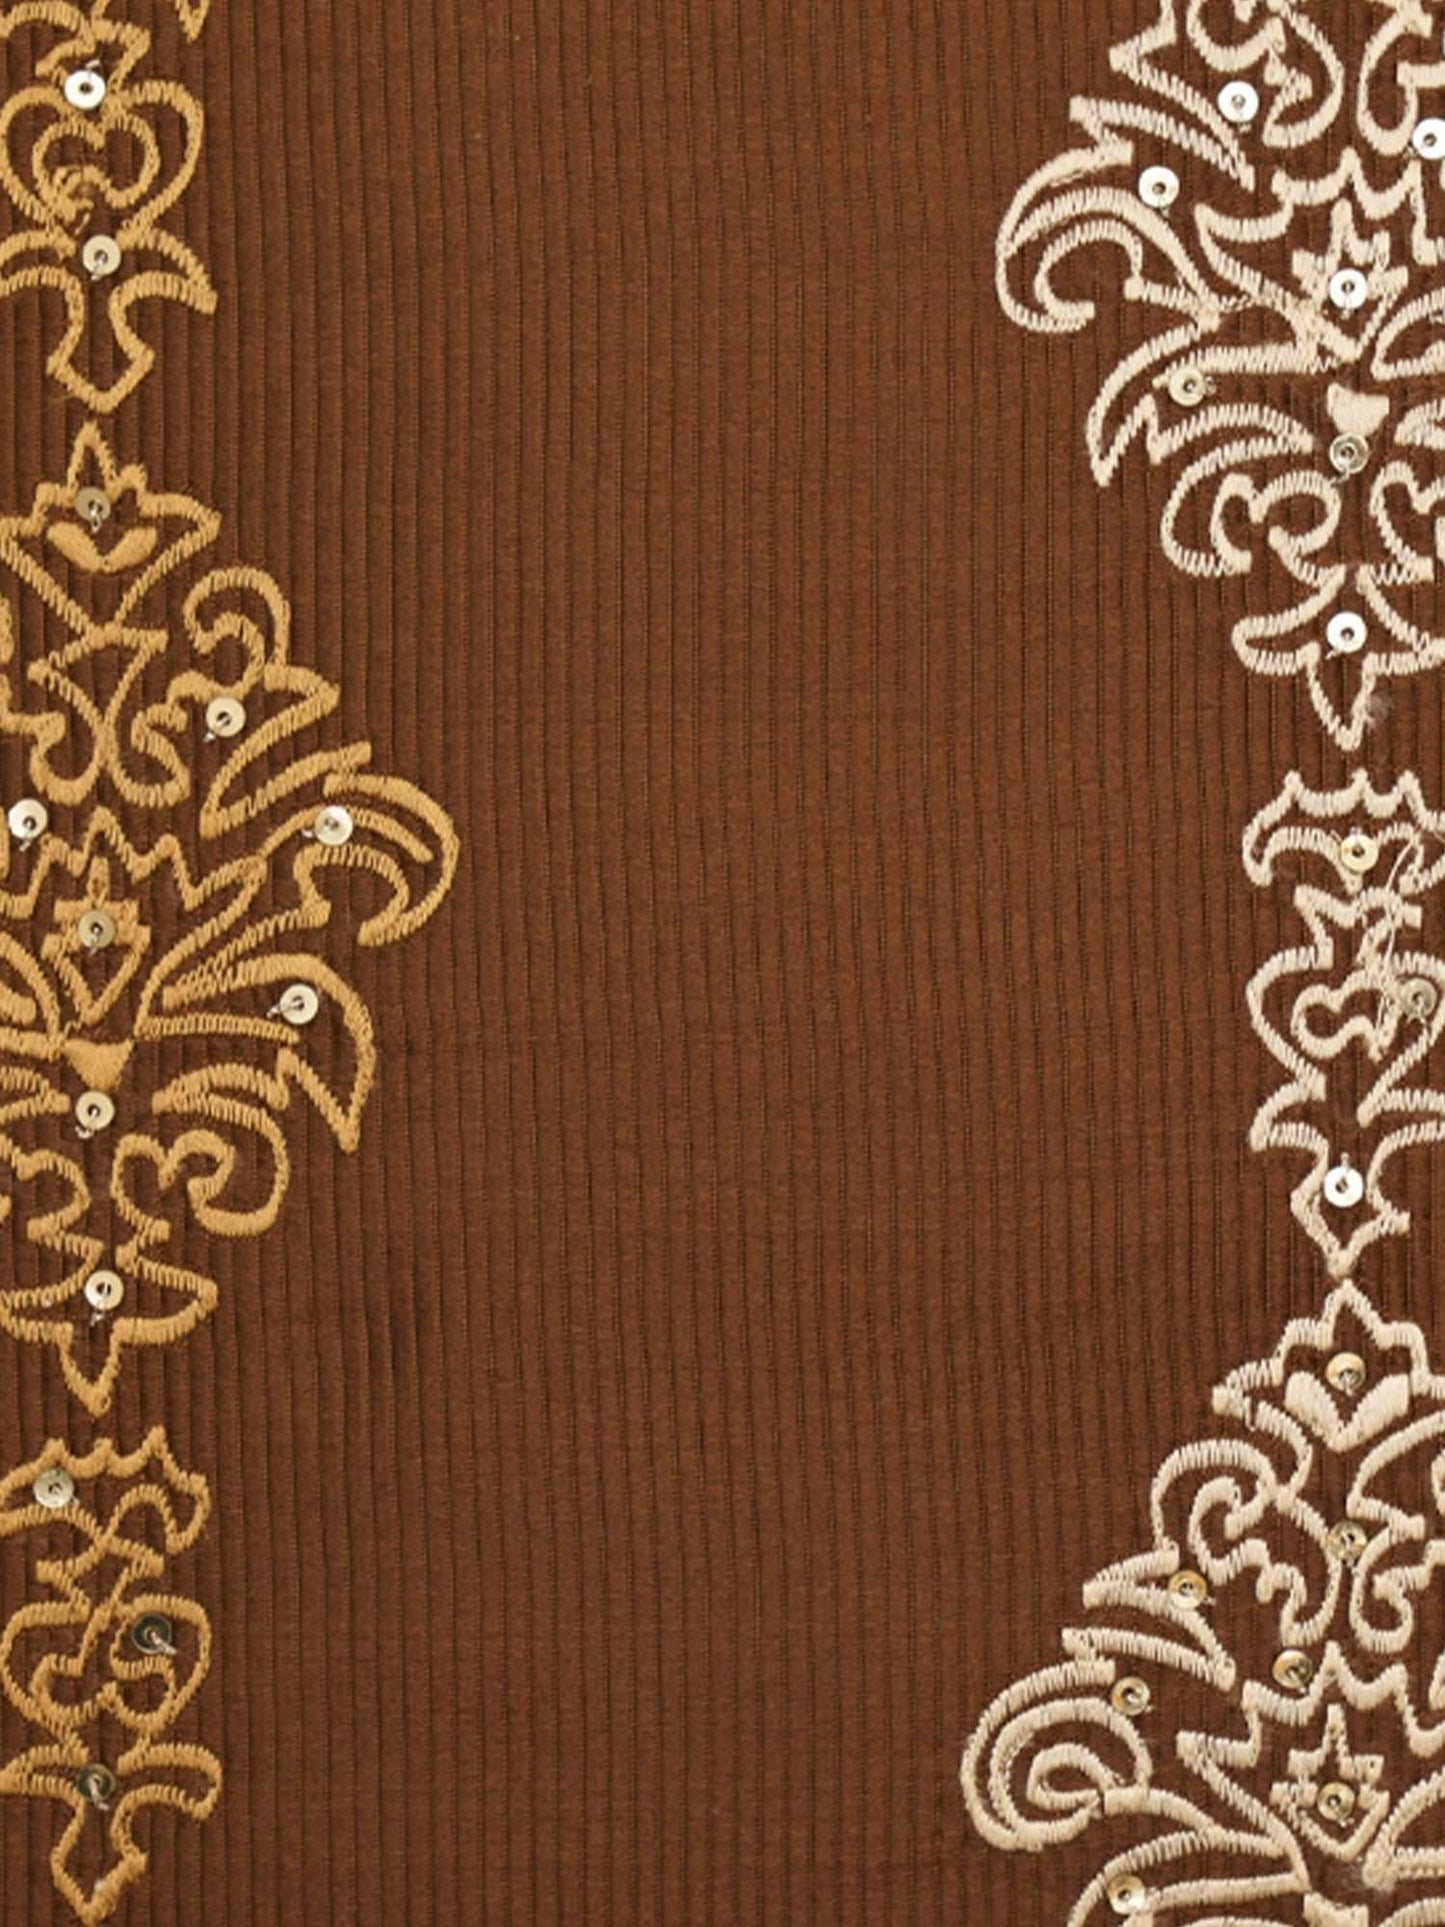 Cushion Cover Polyester Blend Embroidery Brown - 16" X 16"